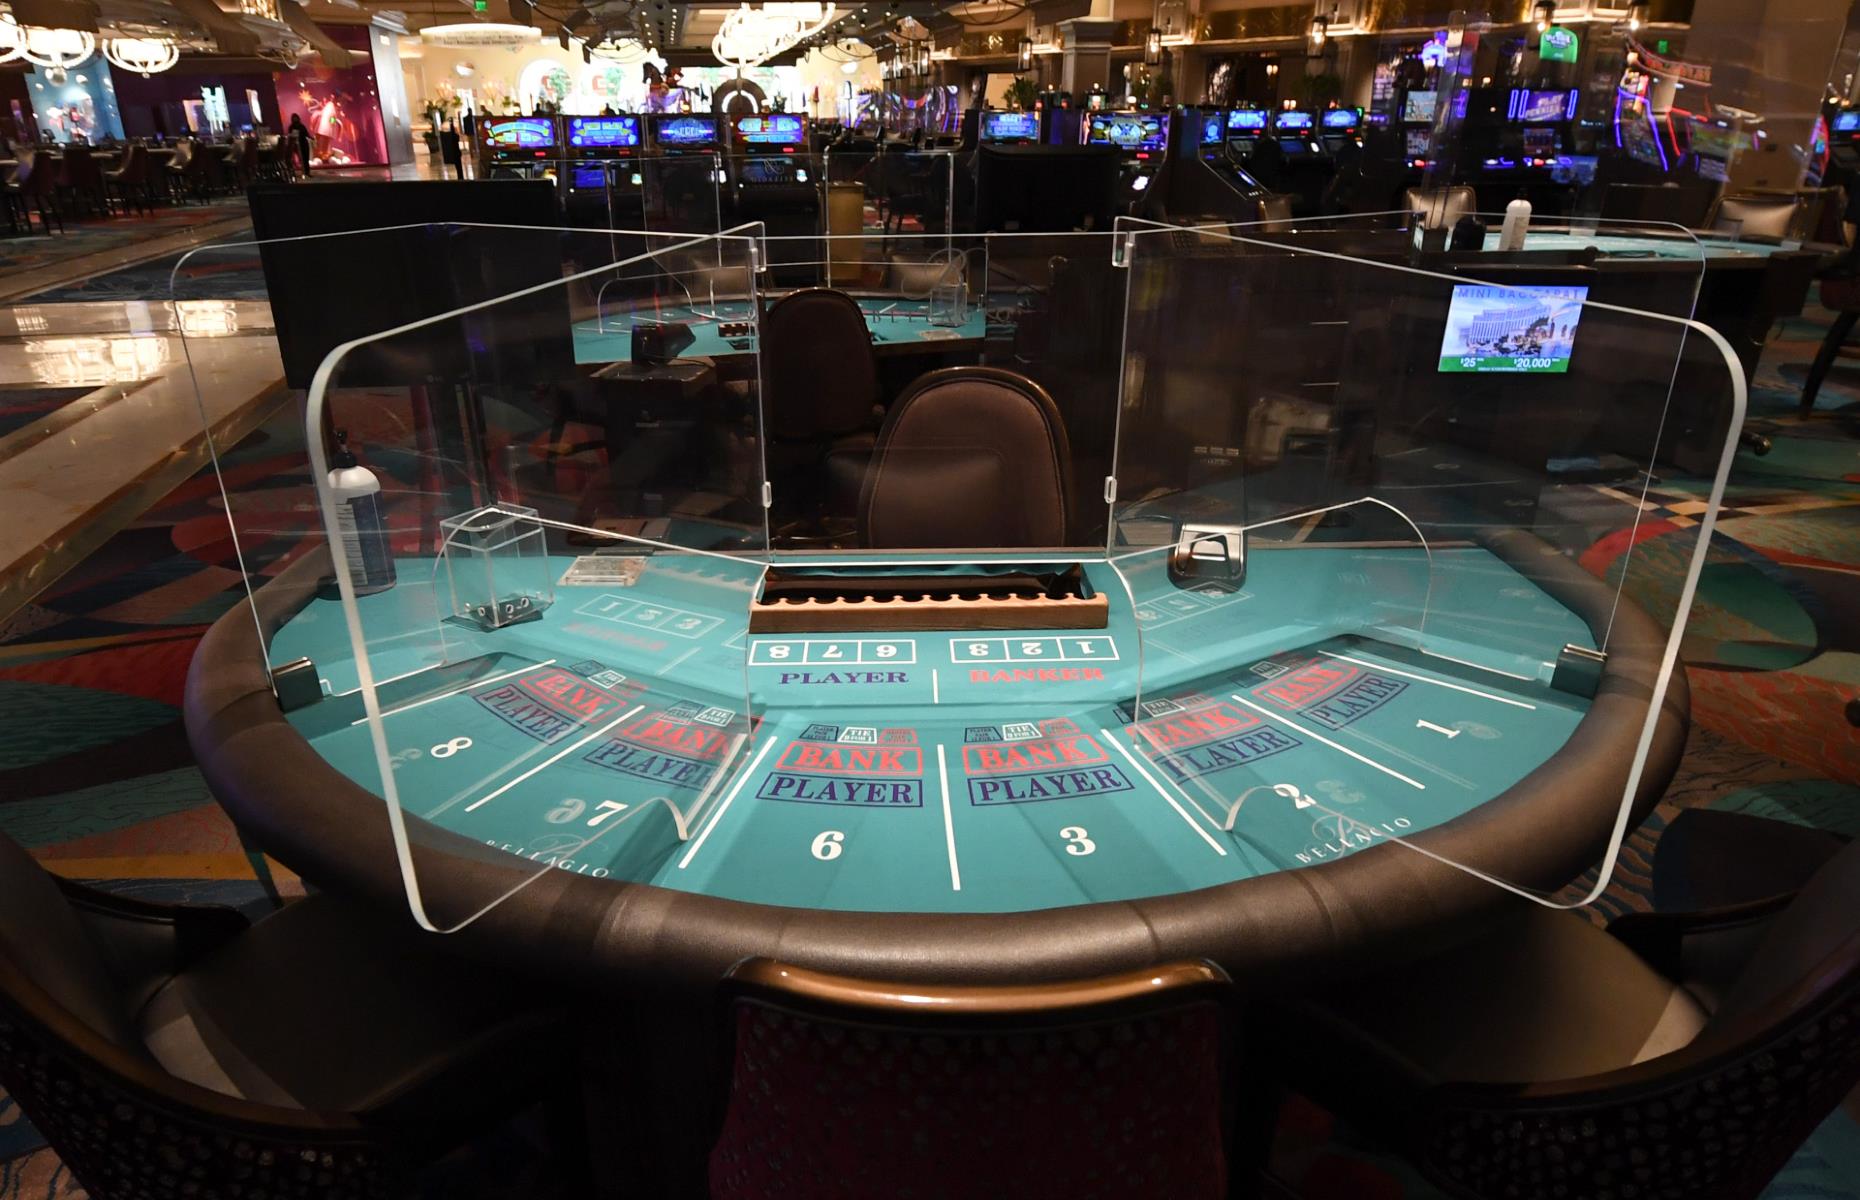 Las Vegas, Nevada: A casino equipped with plastic dividers